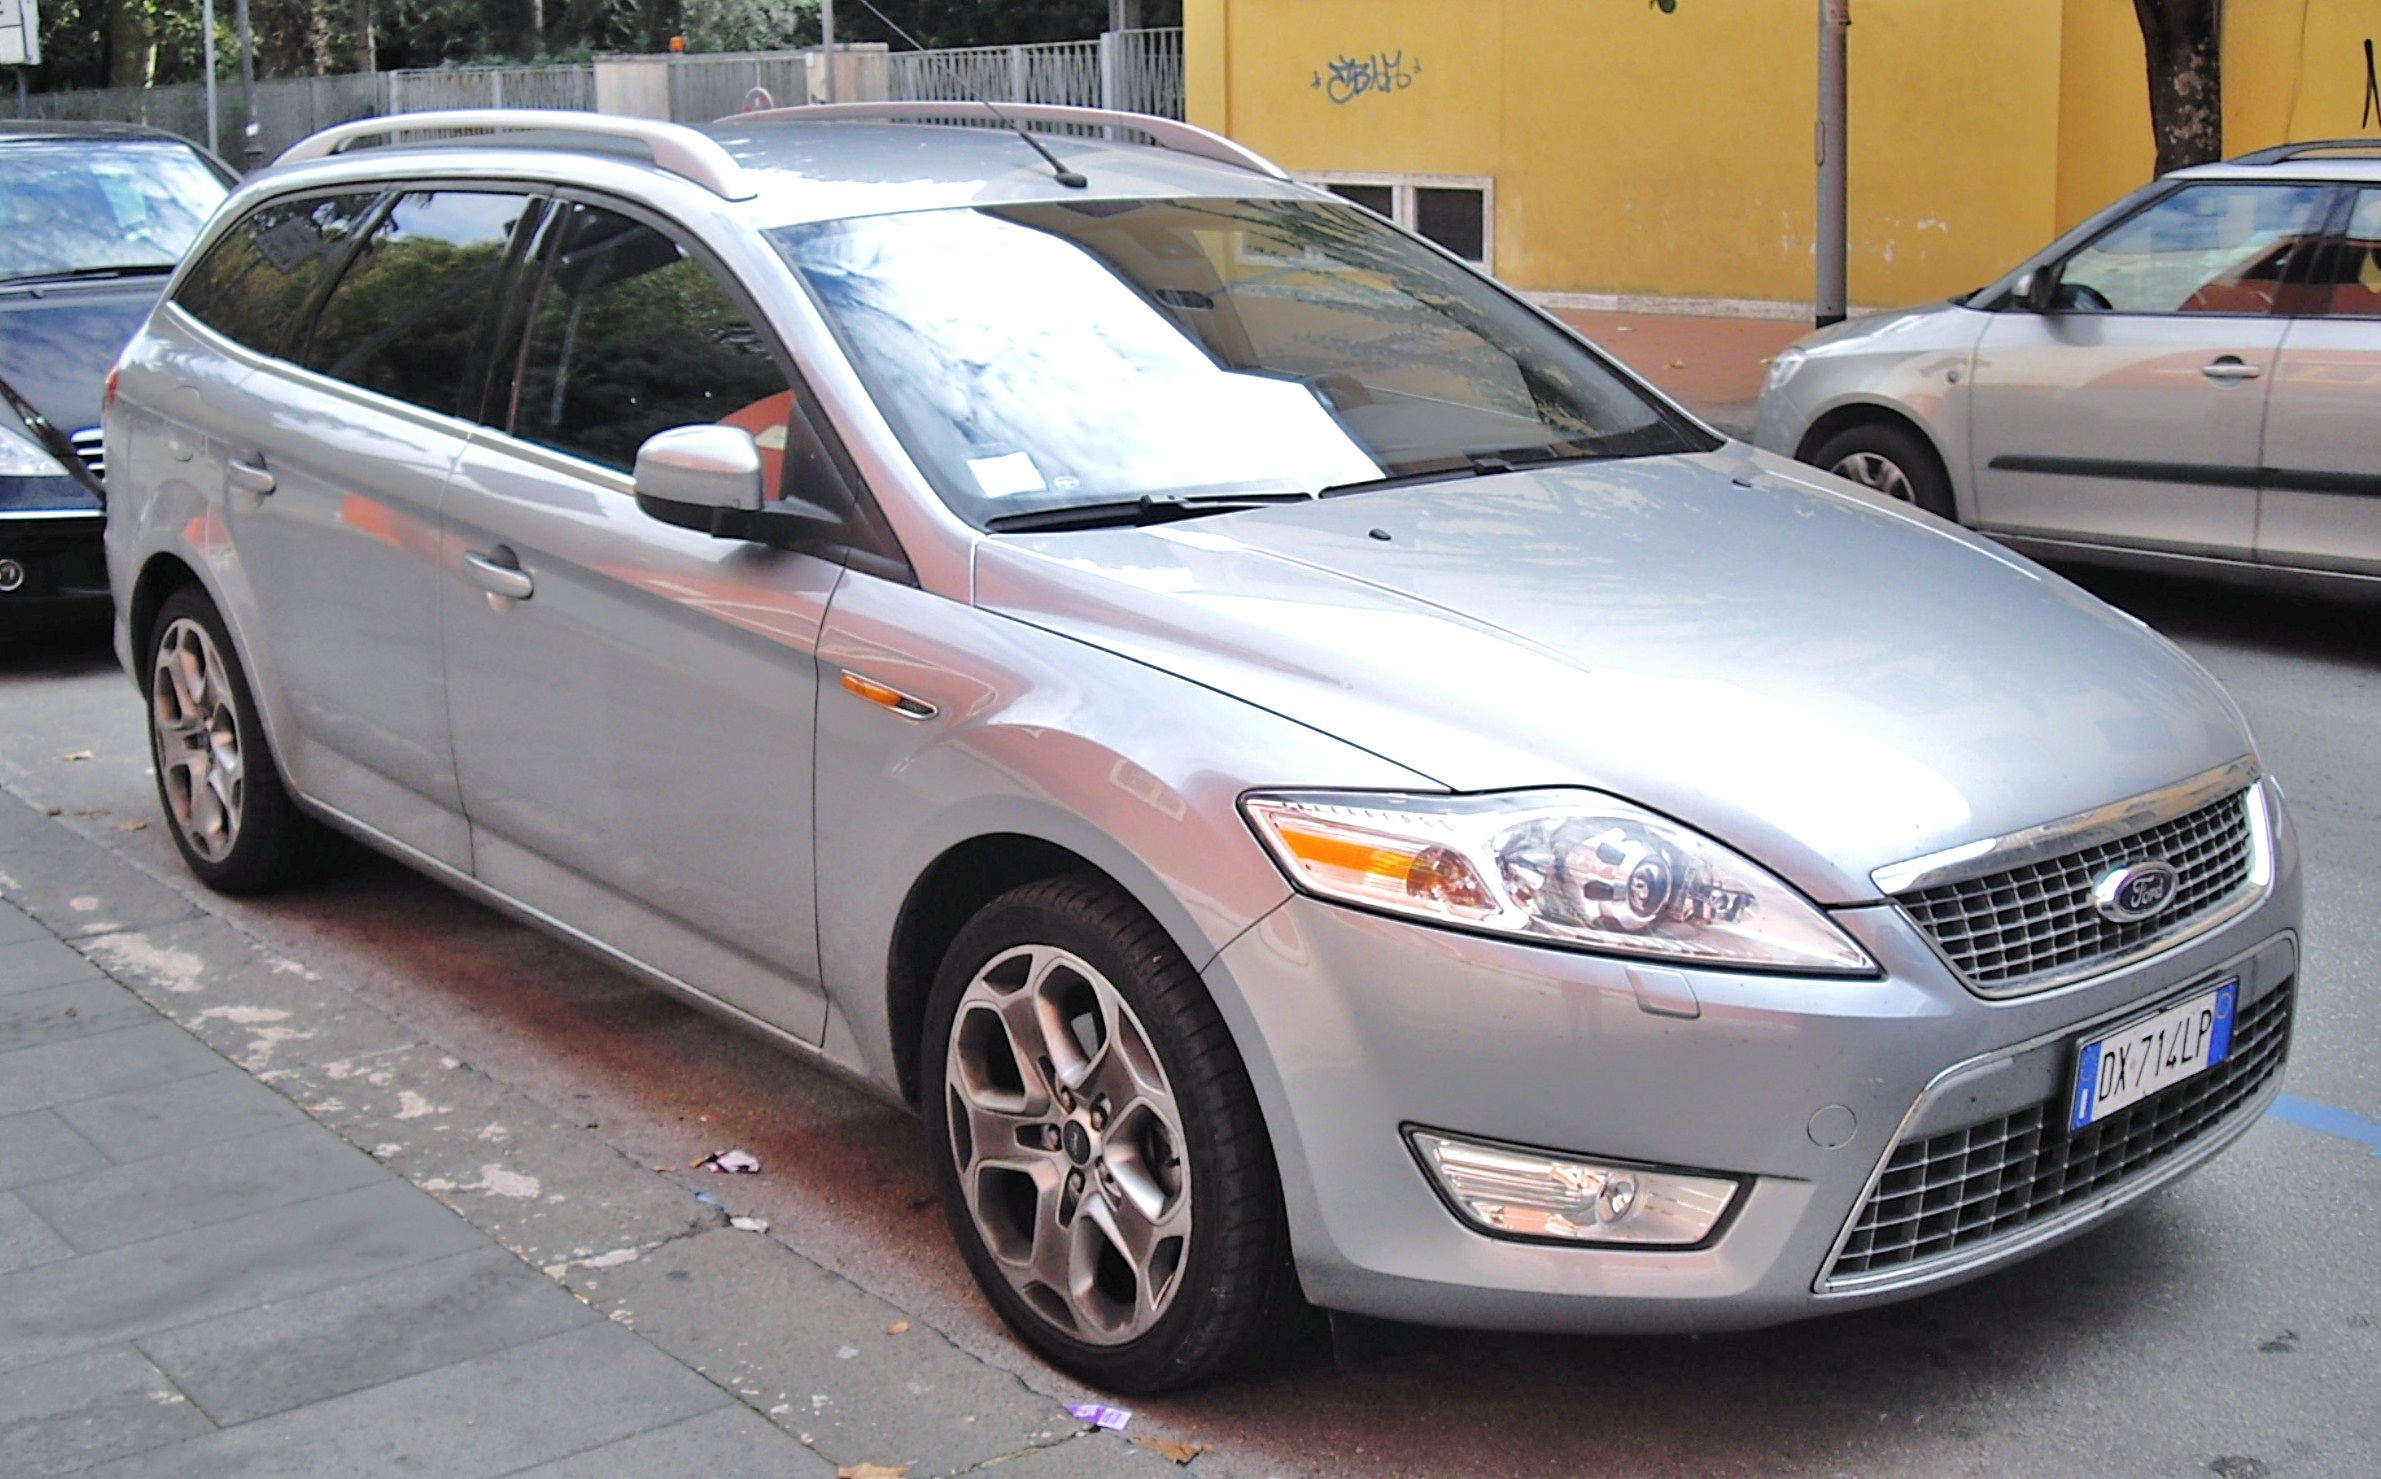 File:Ford Mondeo Station Wagon 2009.jpg - Wikimedia Commons